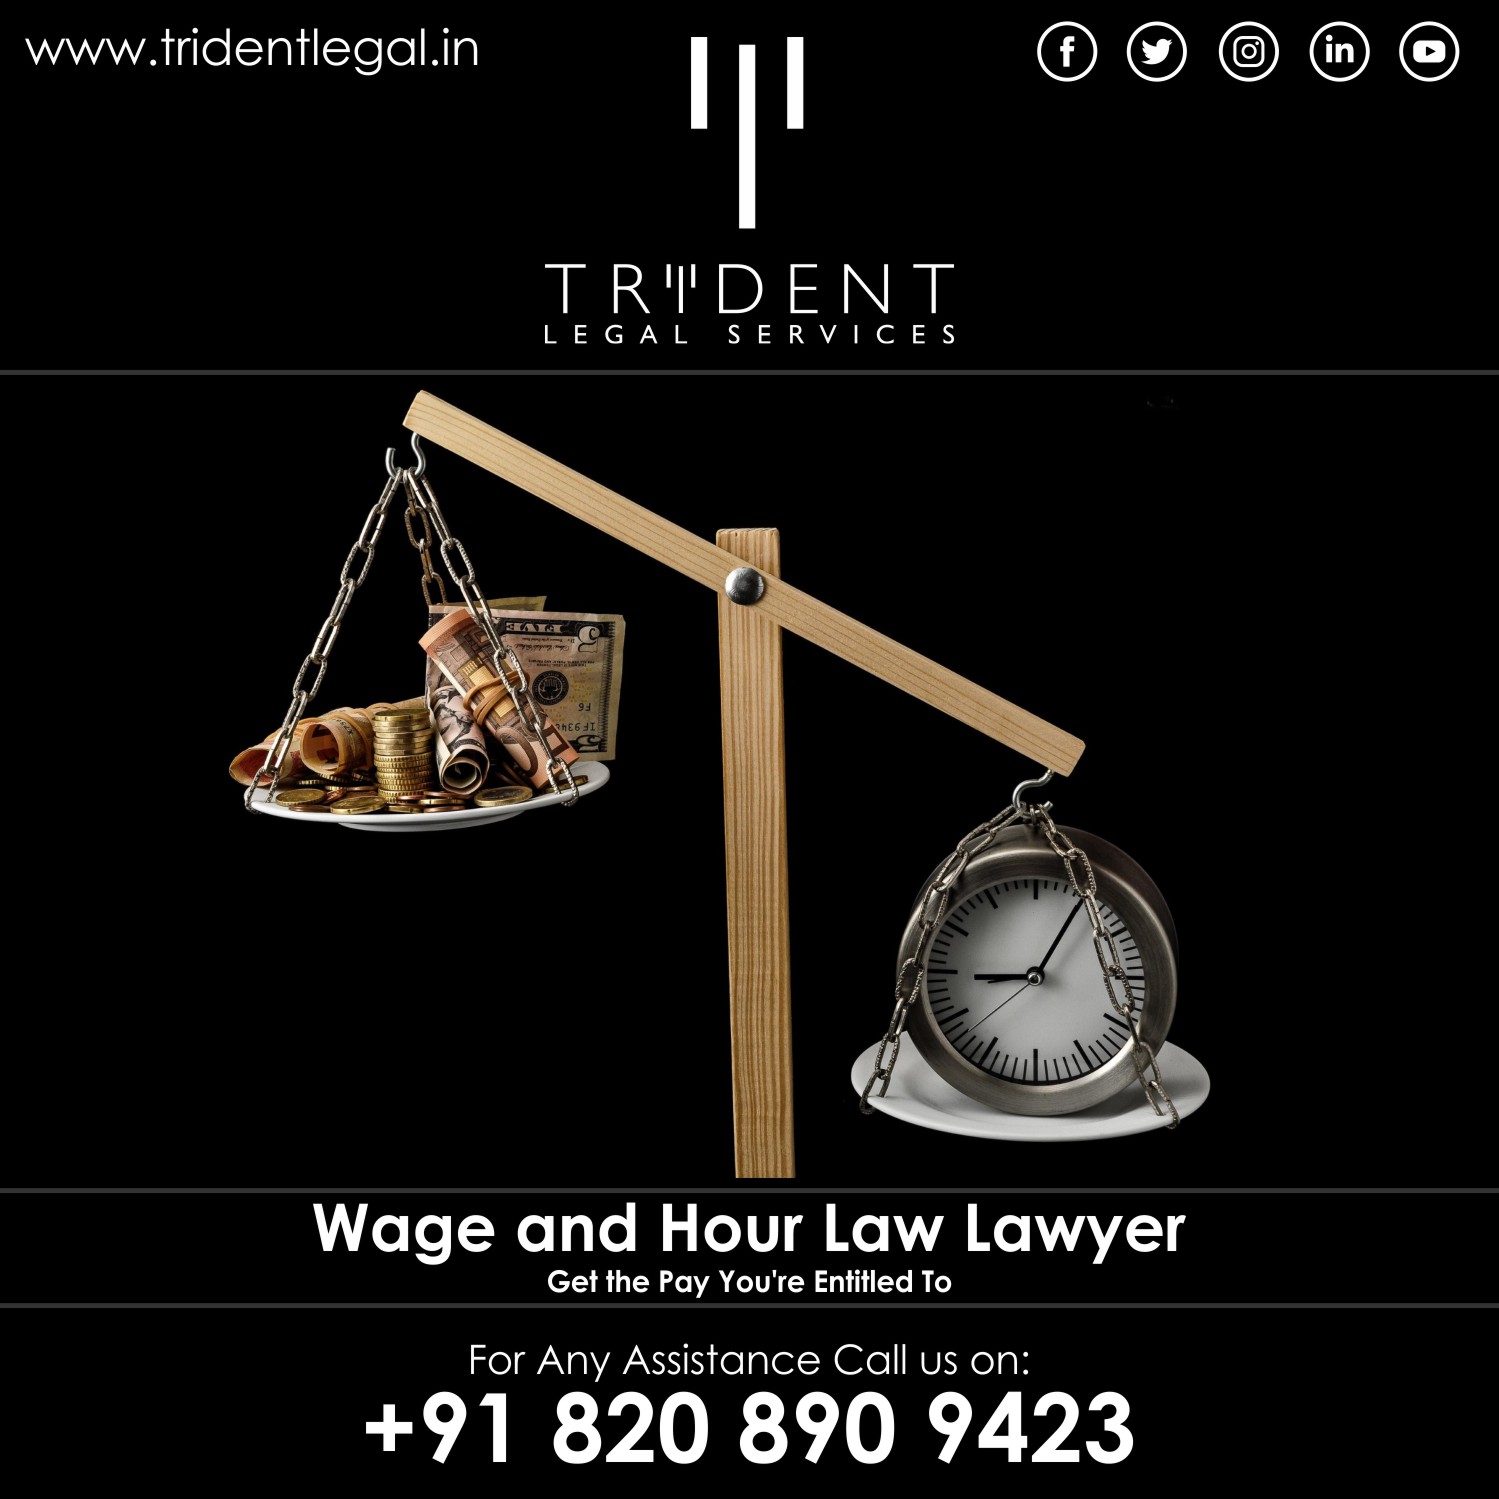 Wage And Hour Law Lawyer in Pune